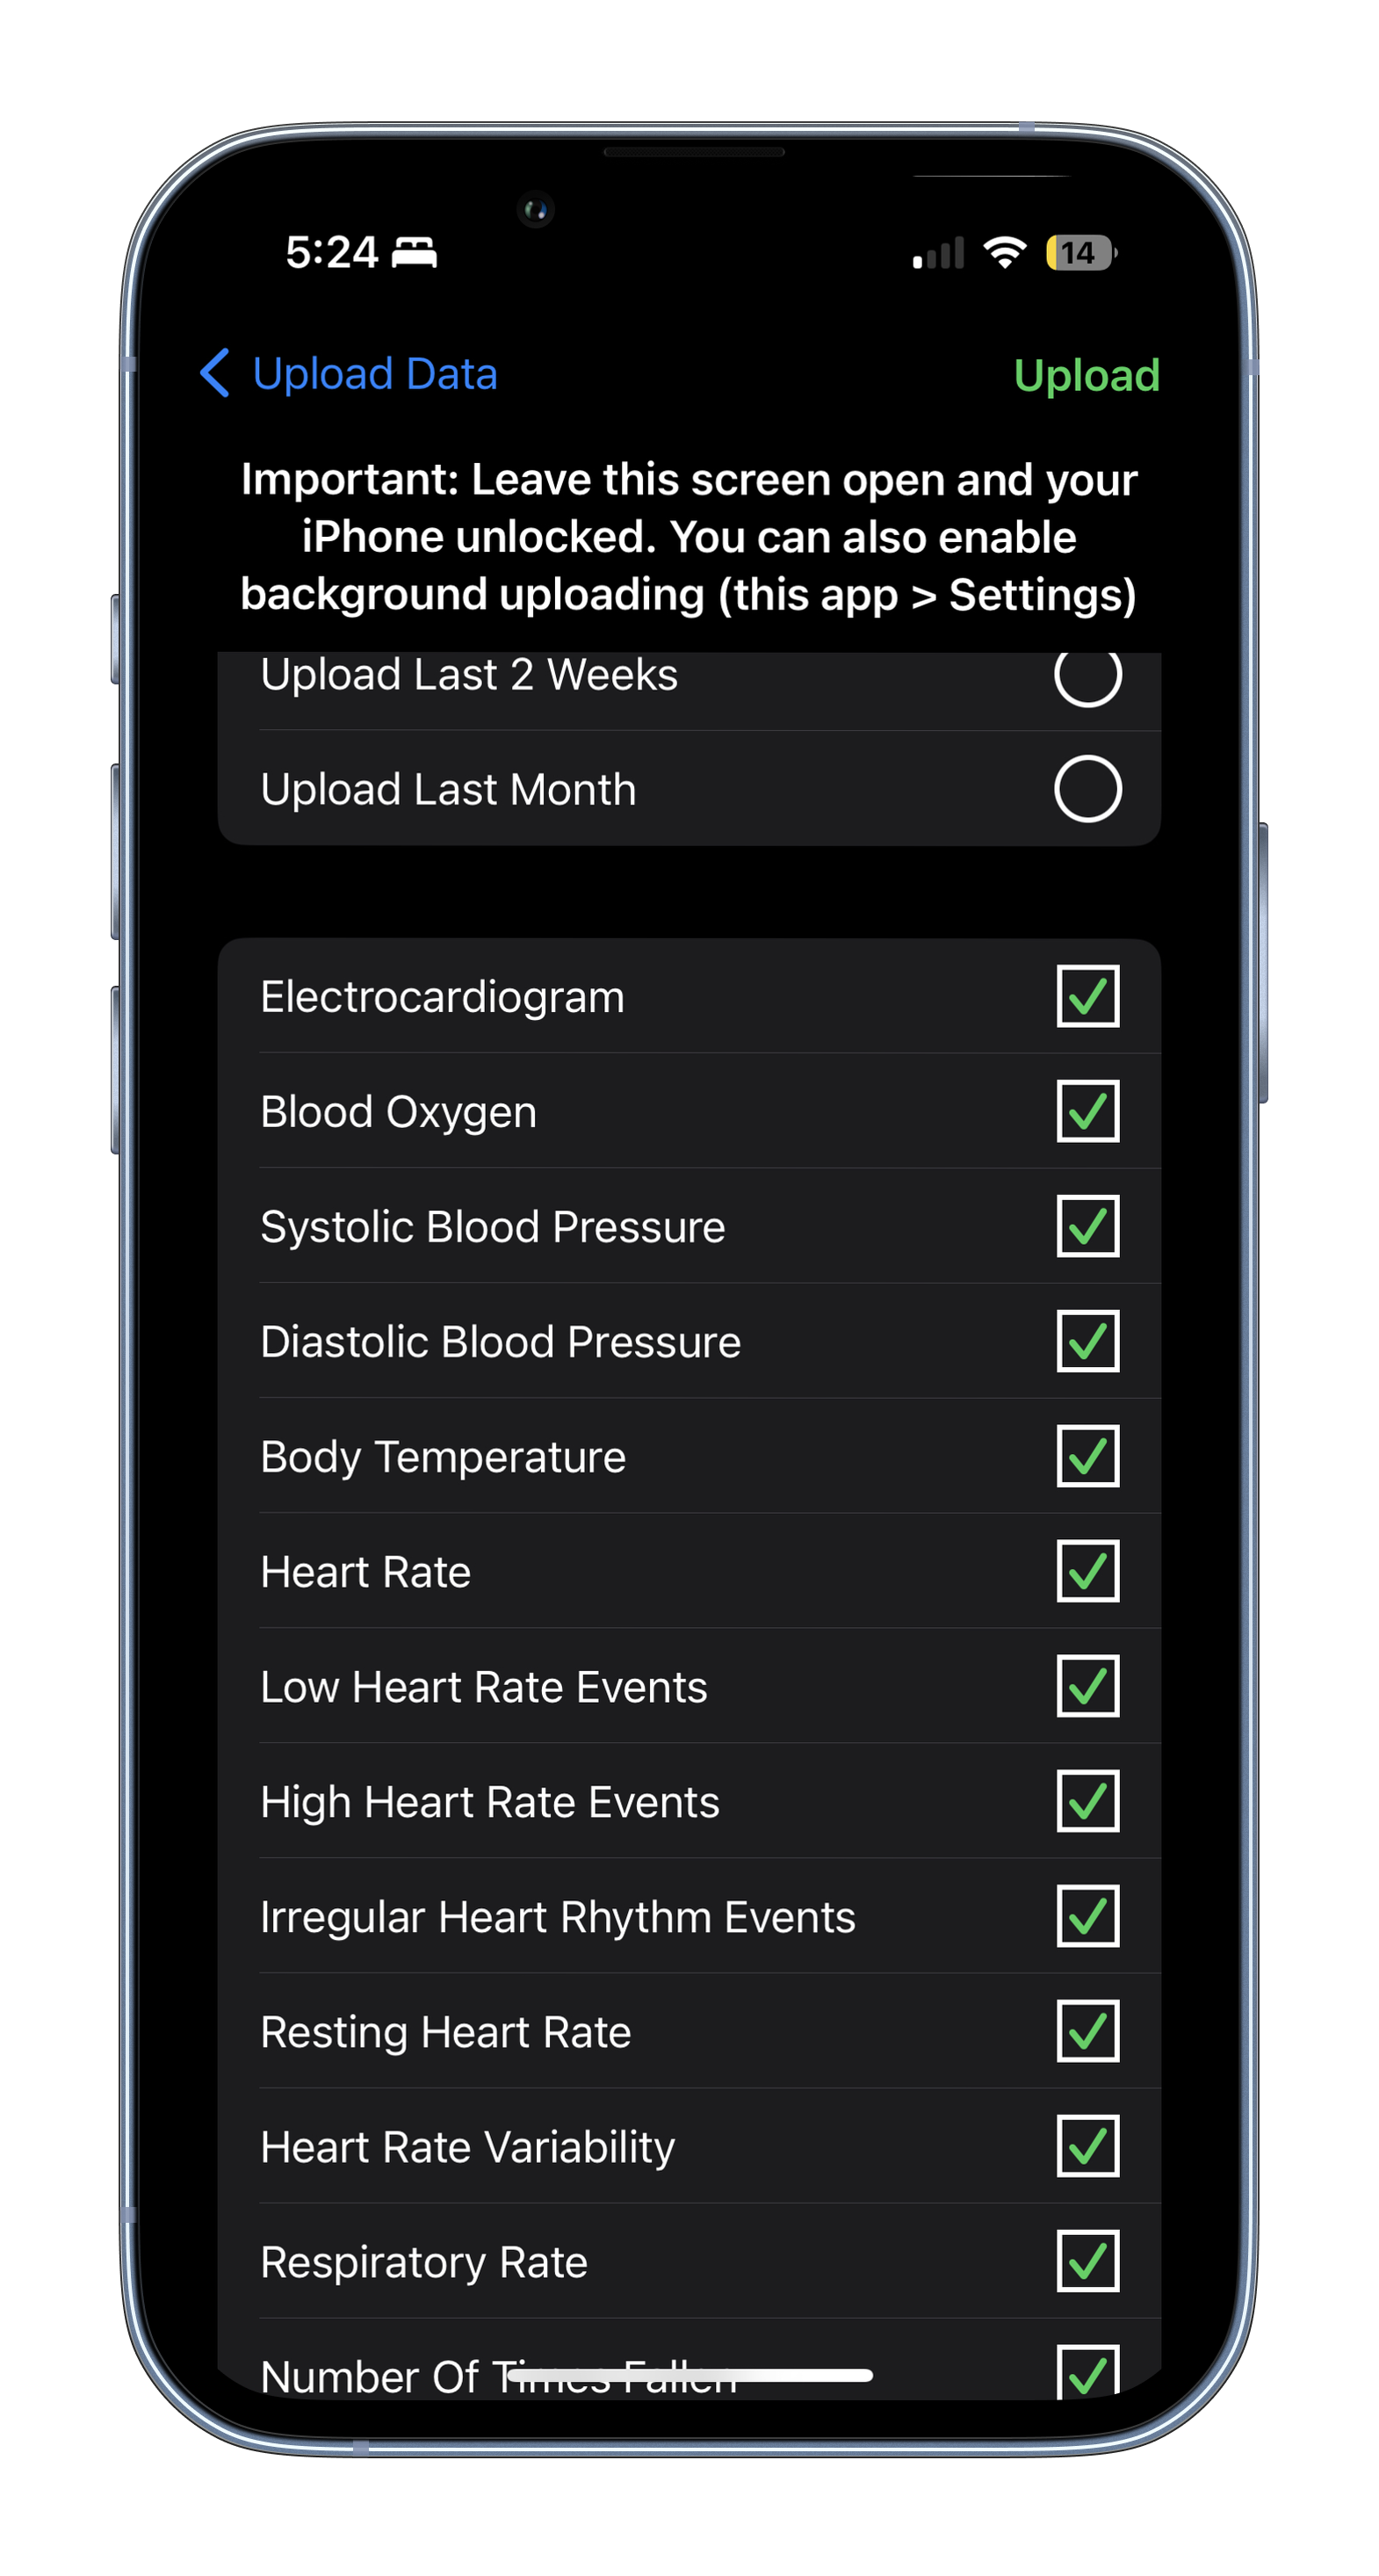 All Apple Health Data Categories Can Be Uploaded To A Patient's HeartCloud Account, Which Is Made Available To The Health Practice That Created Their Account